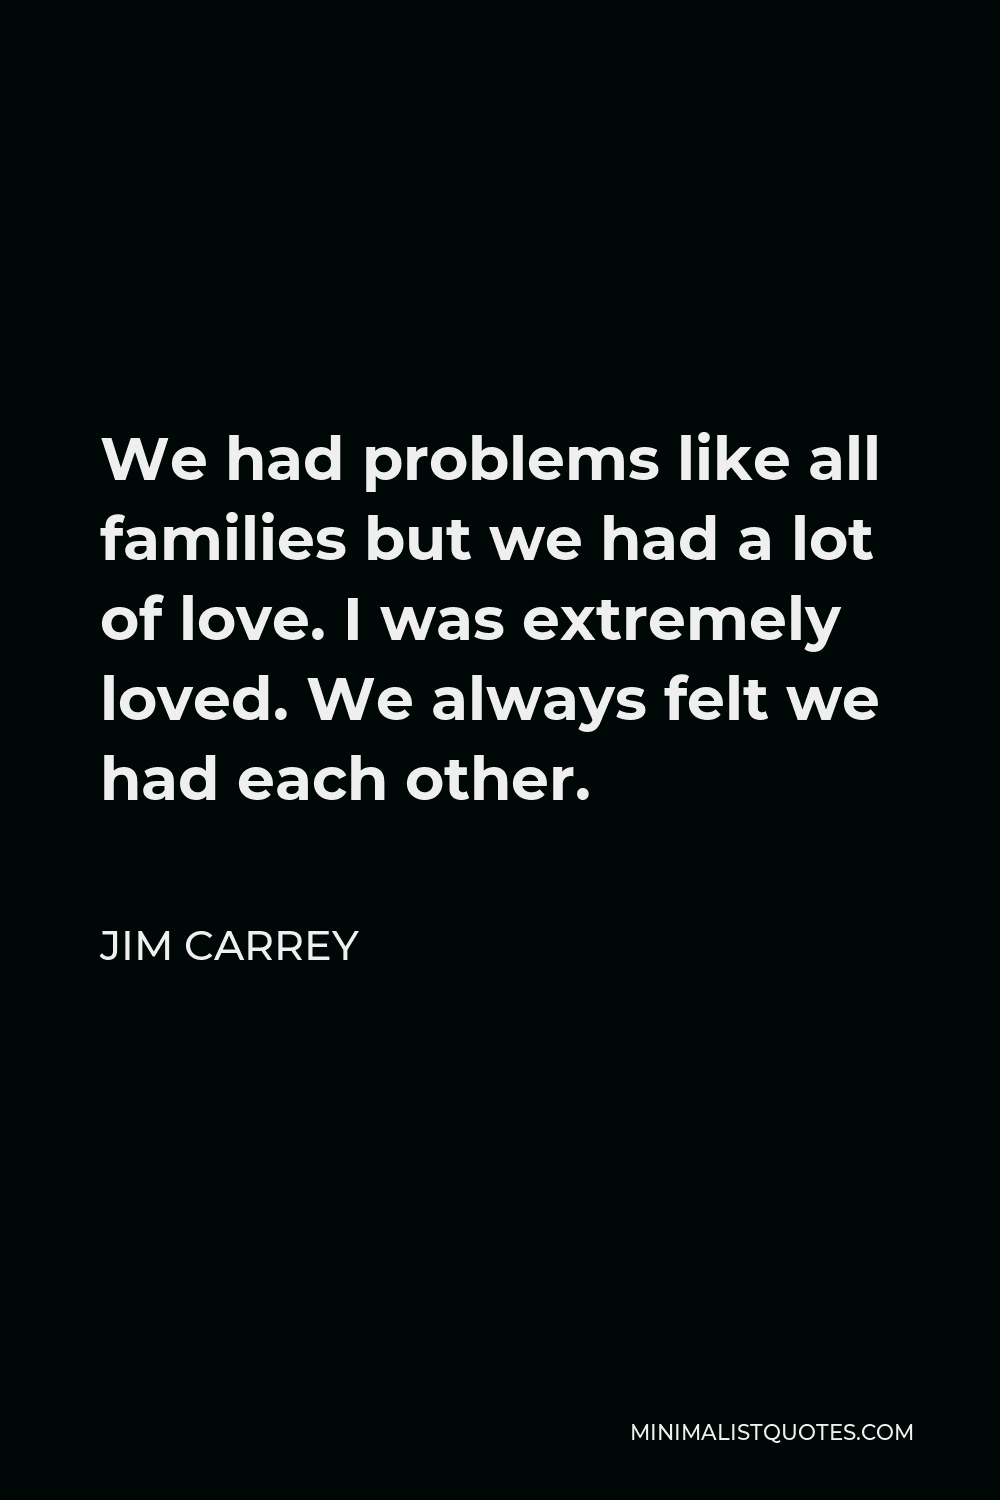 Jim Carrey Quote - We had problems like all families but we had a lot of love. I was extremely loved. We always felt we had each other.